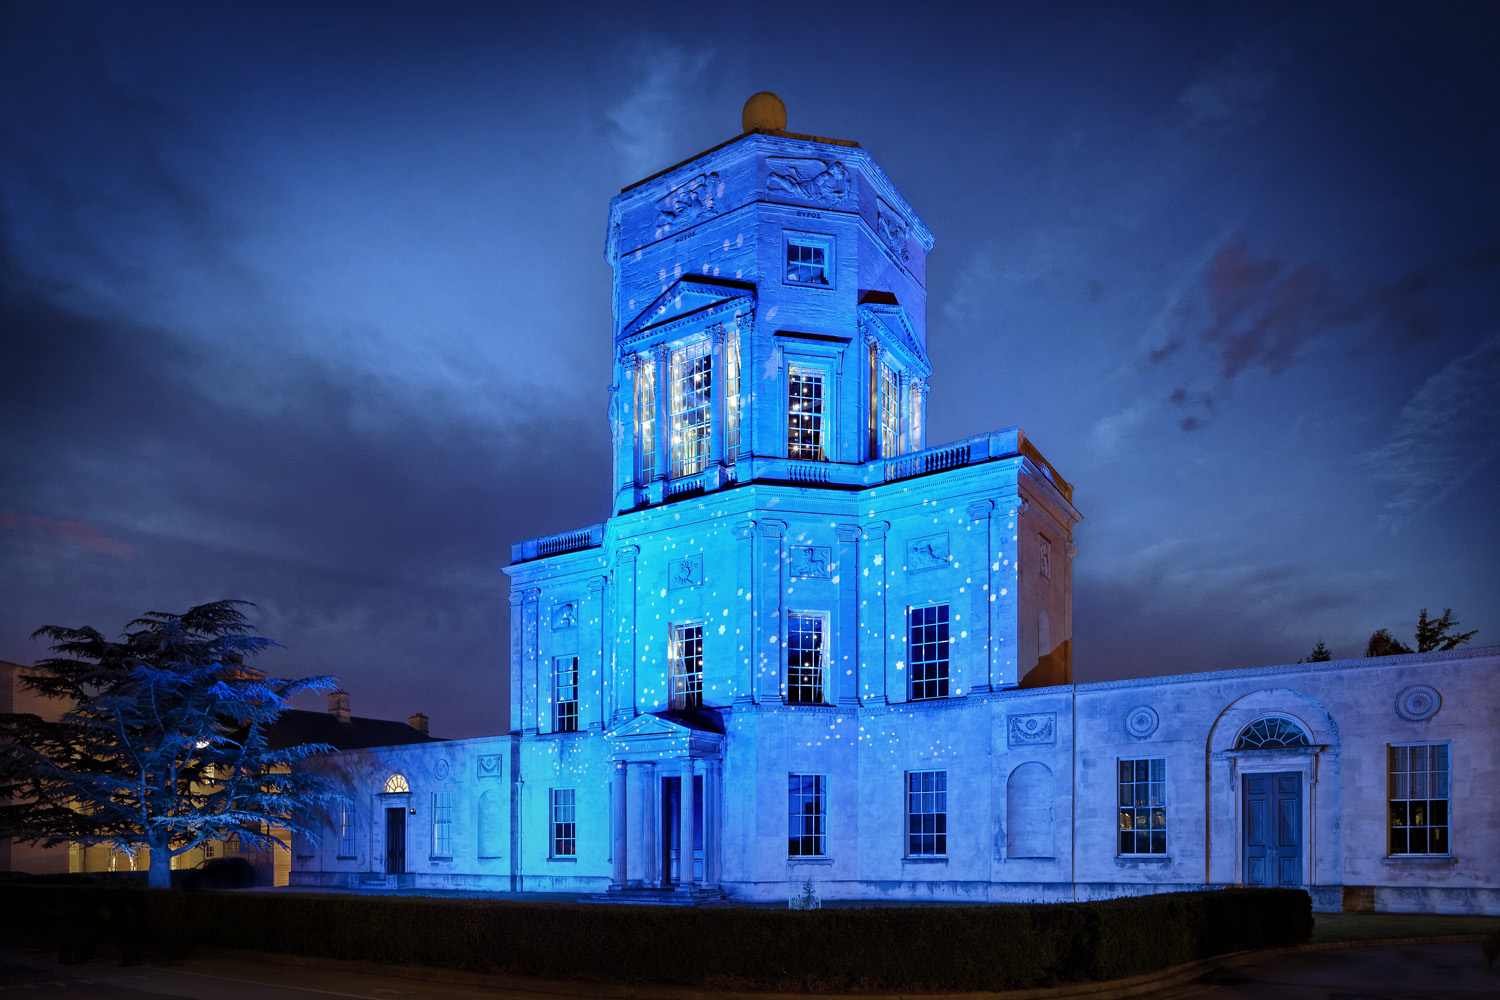  The Radcliffe Observatory building in Oxford lit up for the 2017 Night of Heritage Light. 